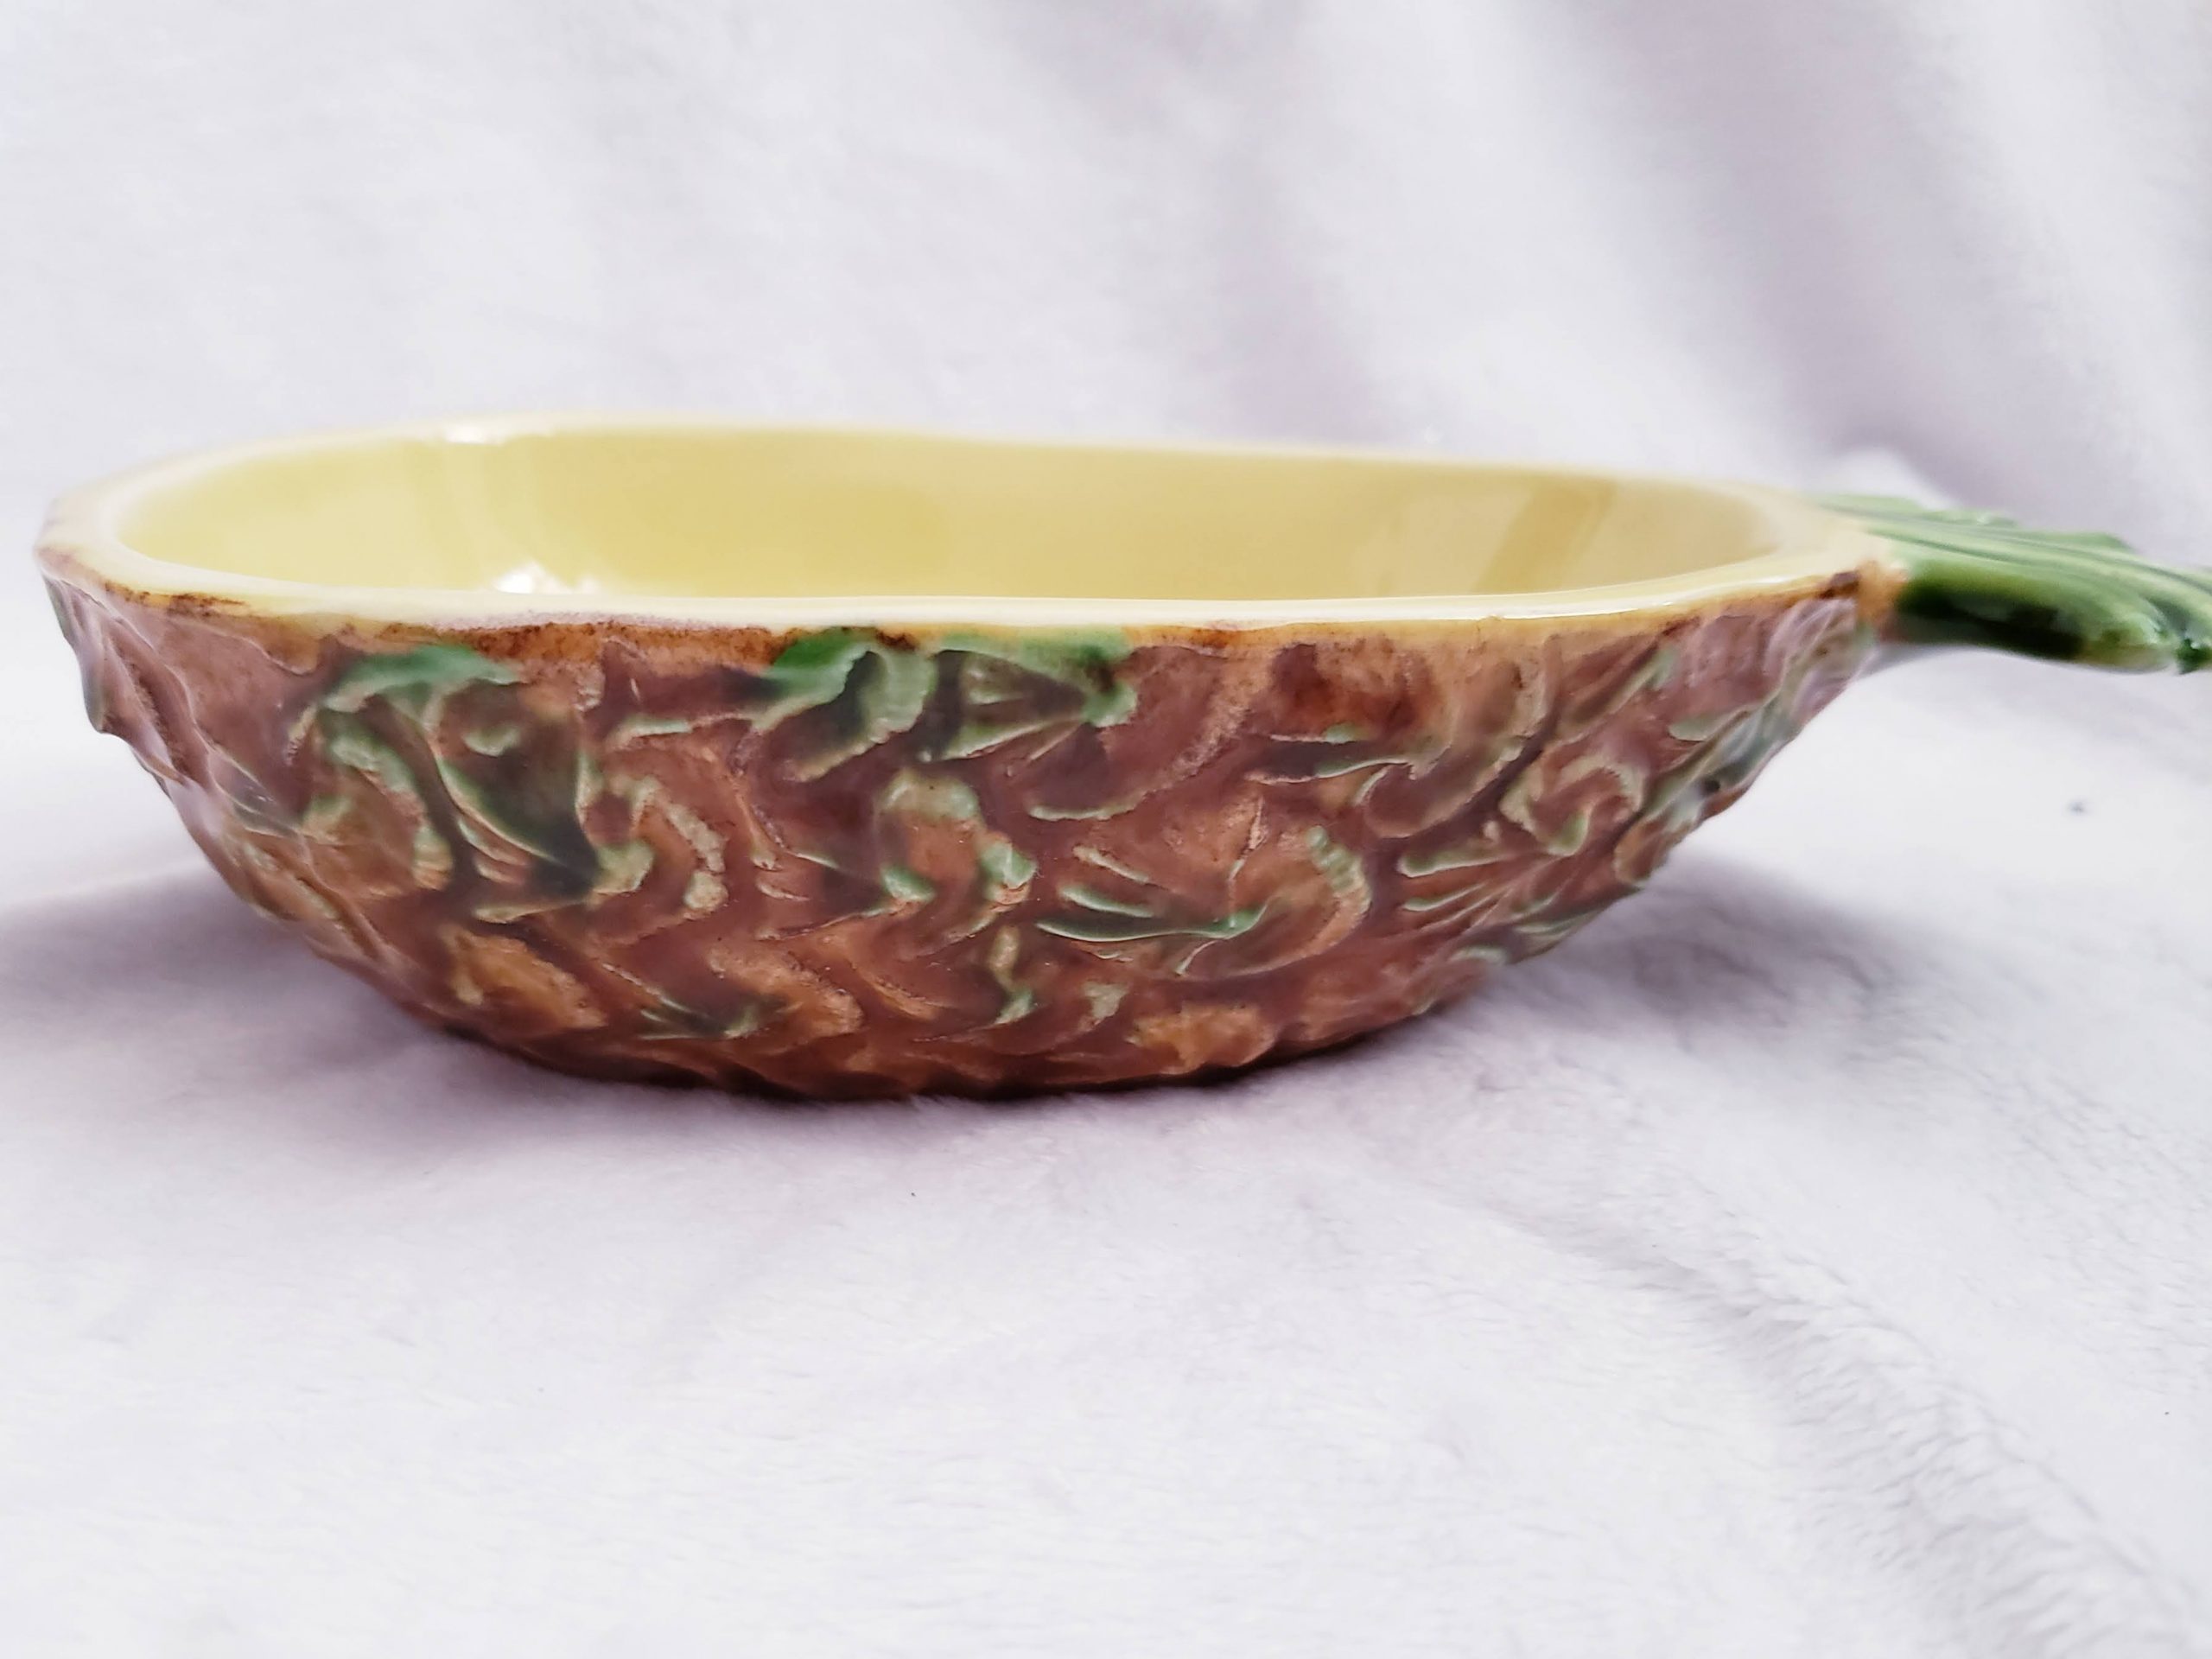 https://serstyle.com/wp-content/uploads/2020/03/pineapple-majolica-bowl-scaled.jpg